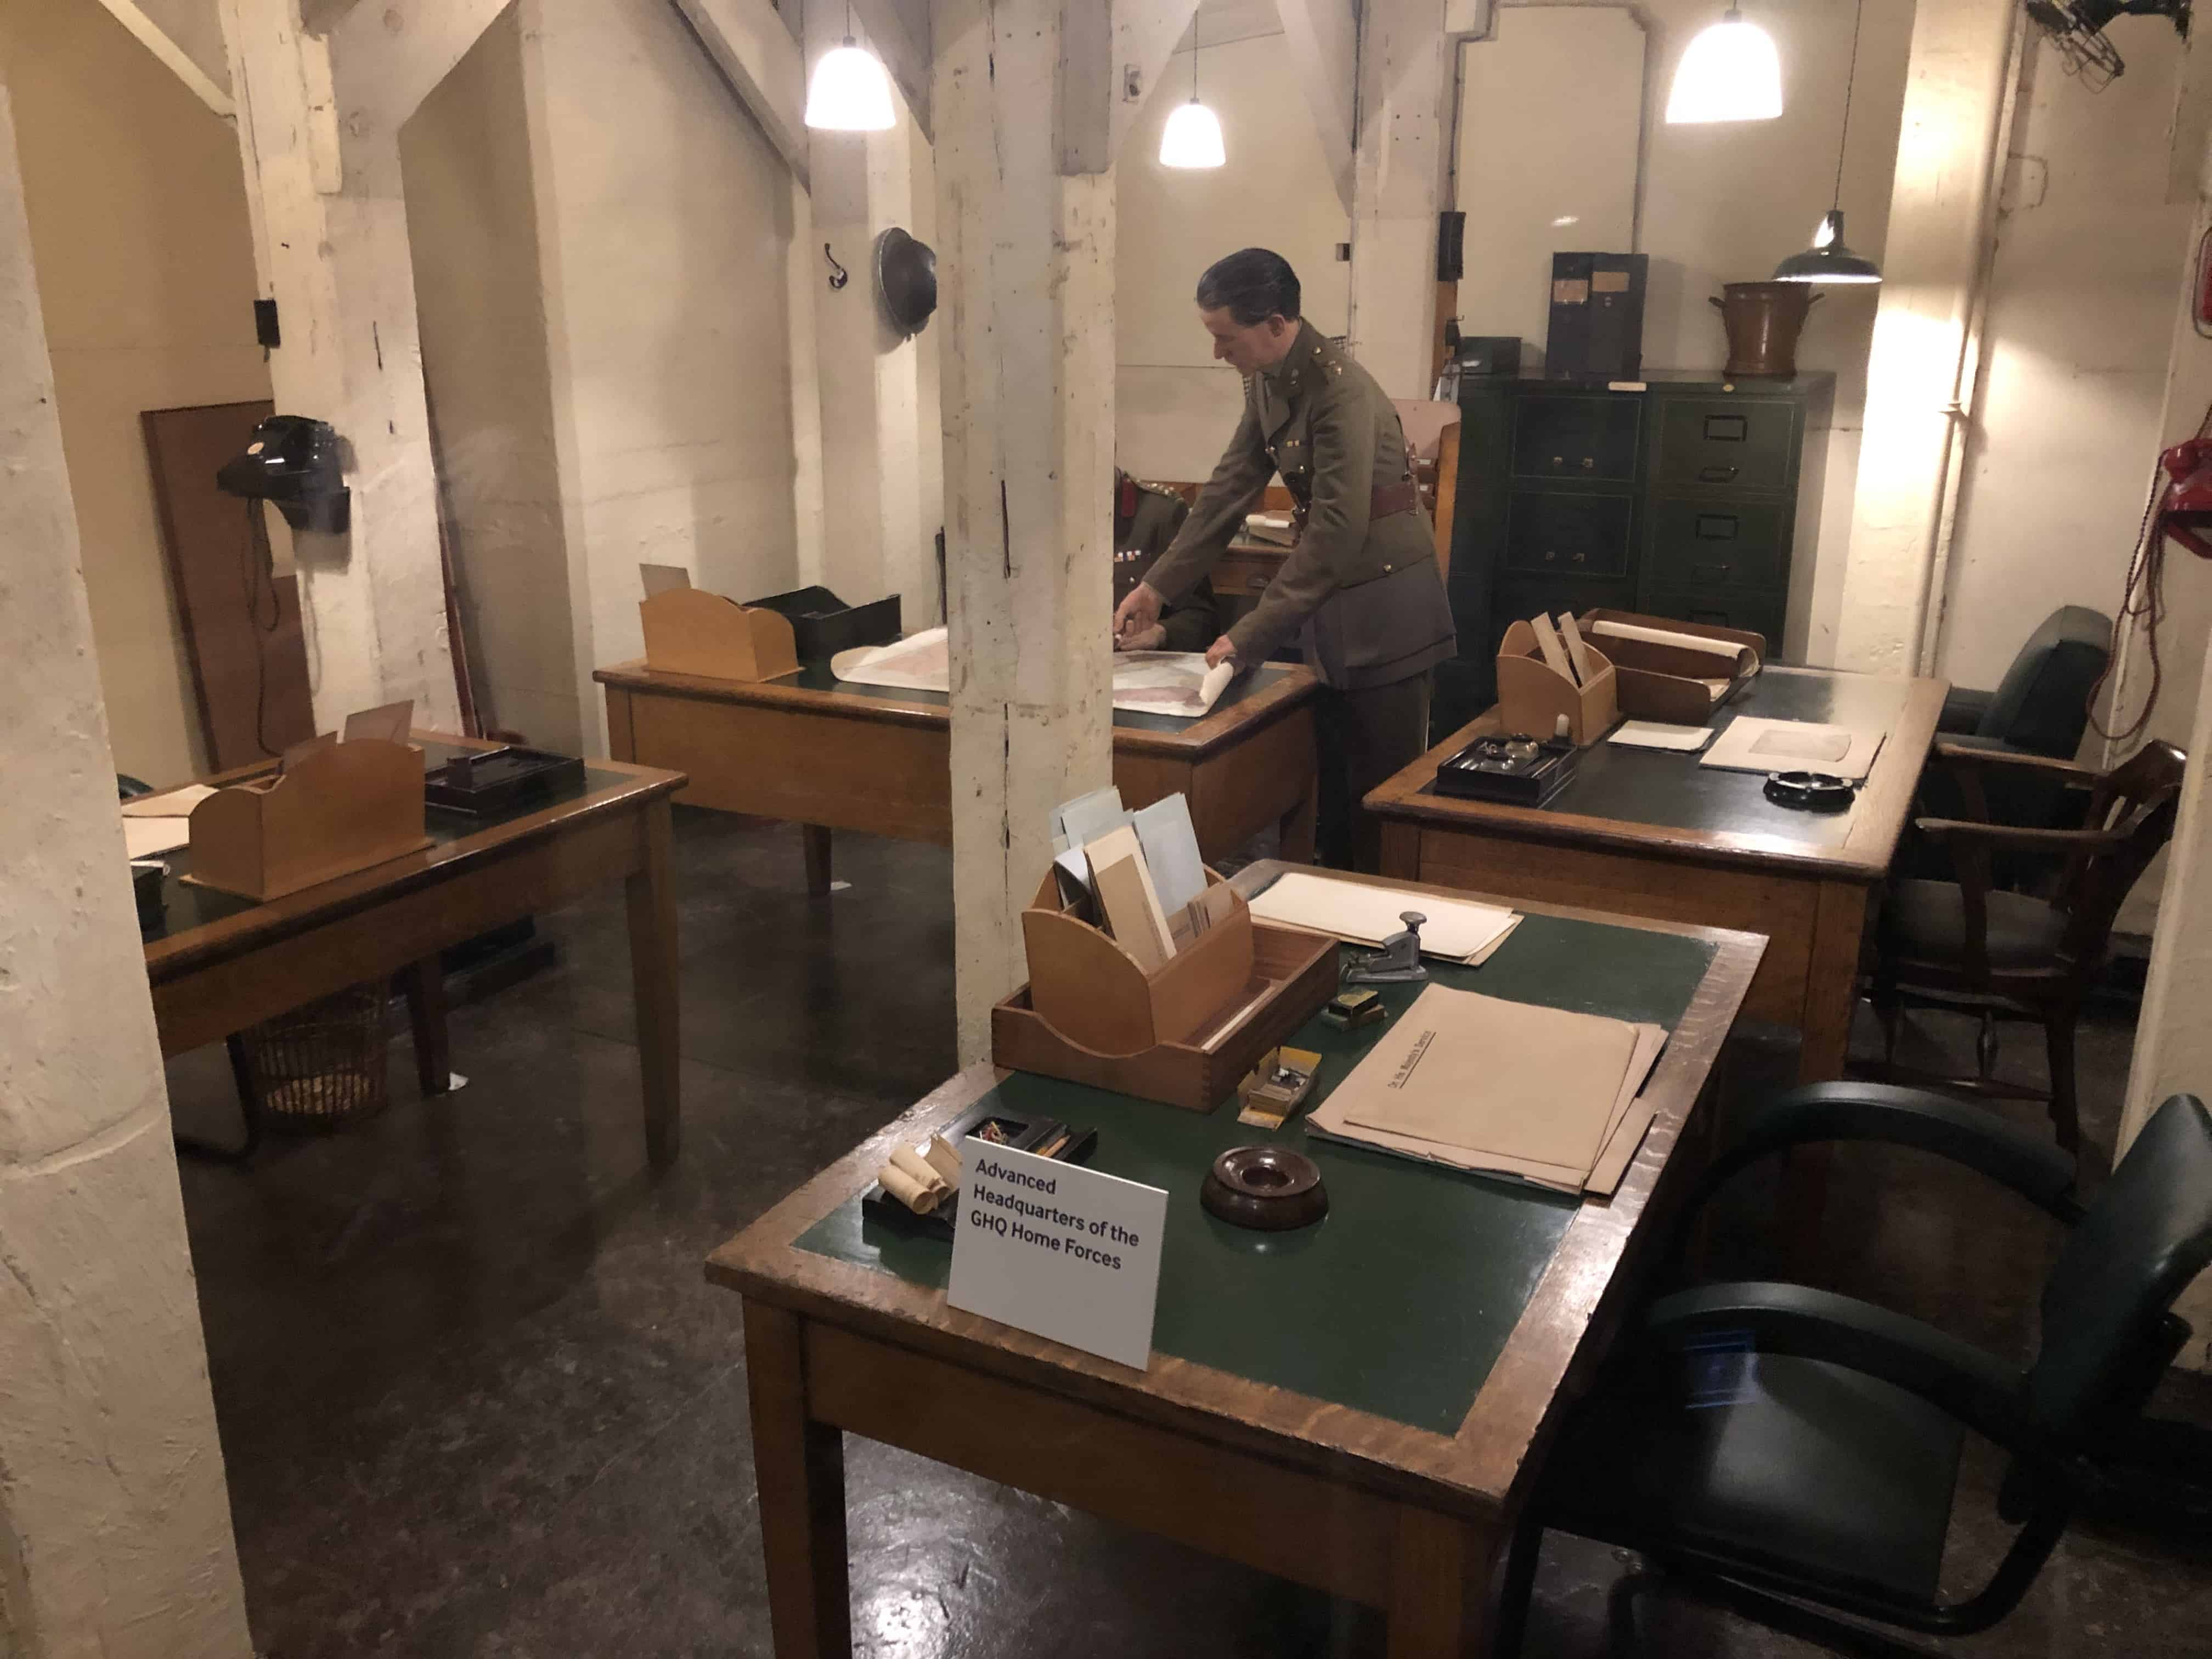 Advanced Headquarters of the GHQ Home Forces at the Churchill War Rooms in London, England